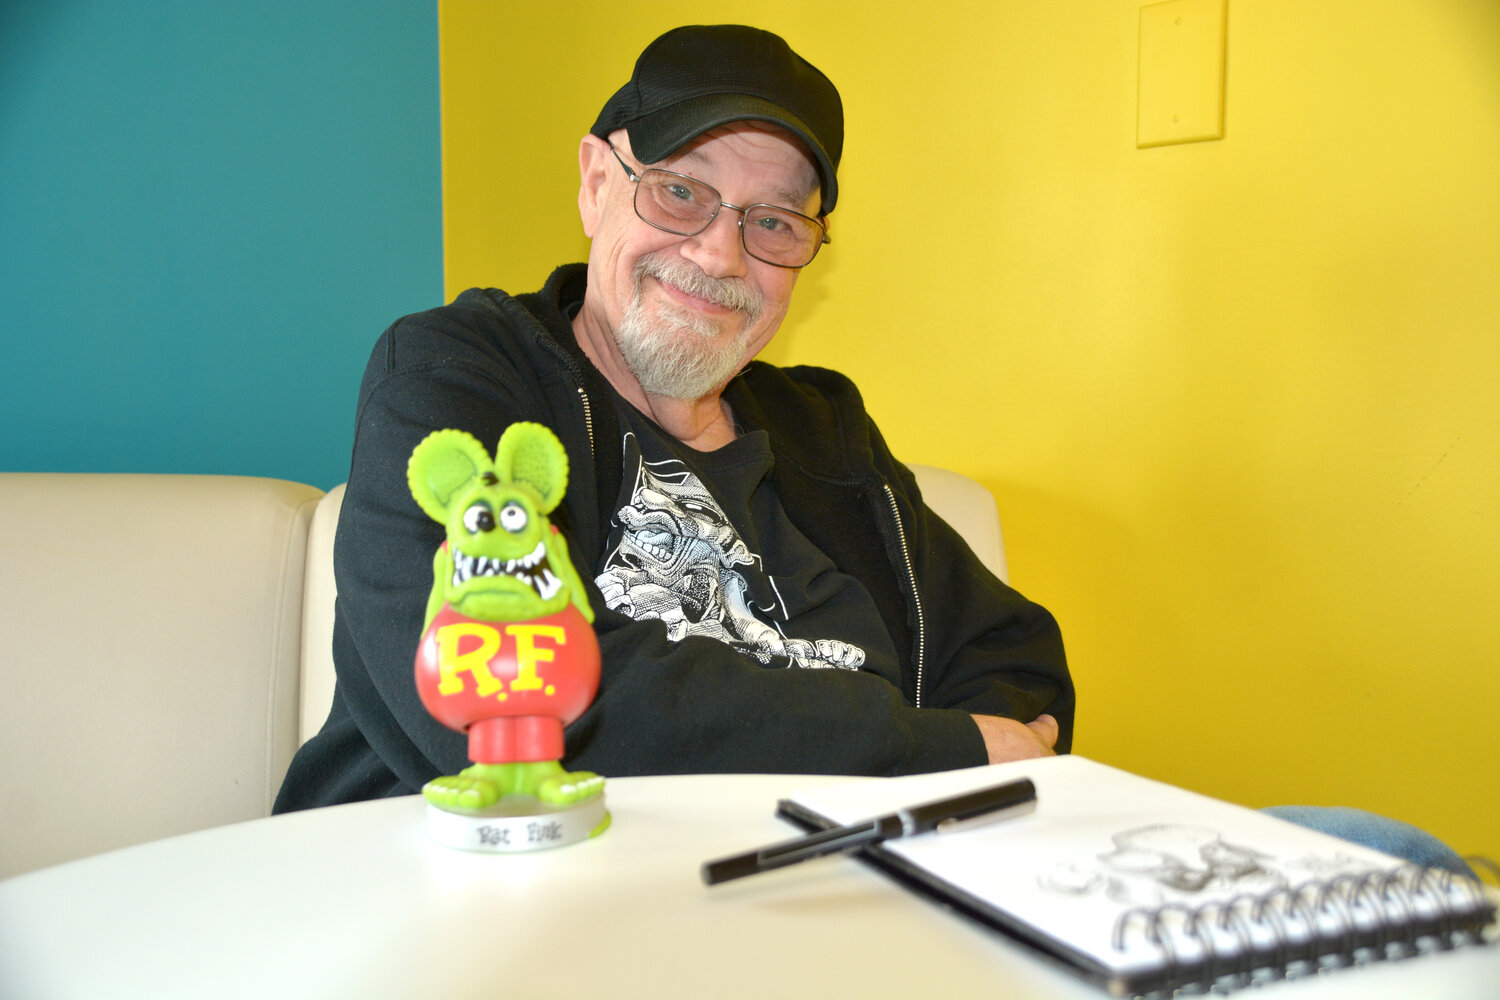 Local artist Dennis Preston poses with his trusty sketch pad and a figurine of Ed “Big Daddy” Roth’s Rat Fink caricature, a major inspiration for his own art.